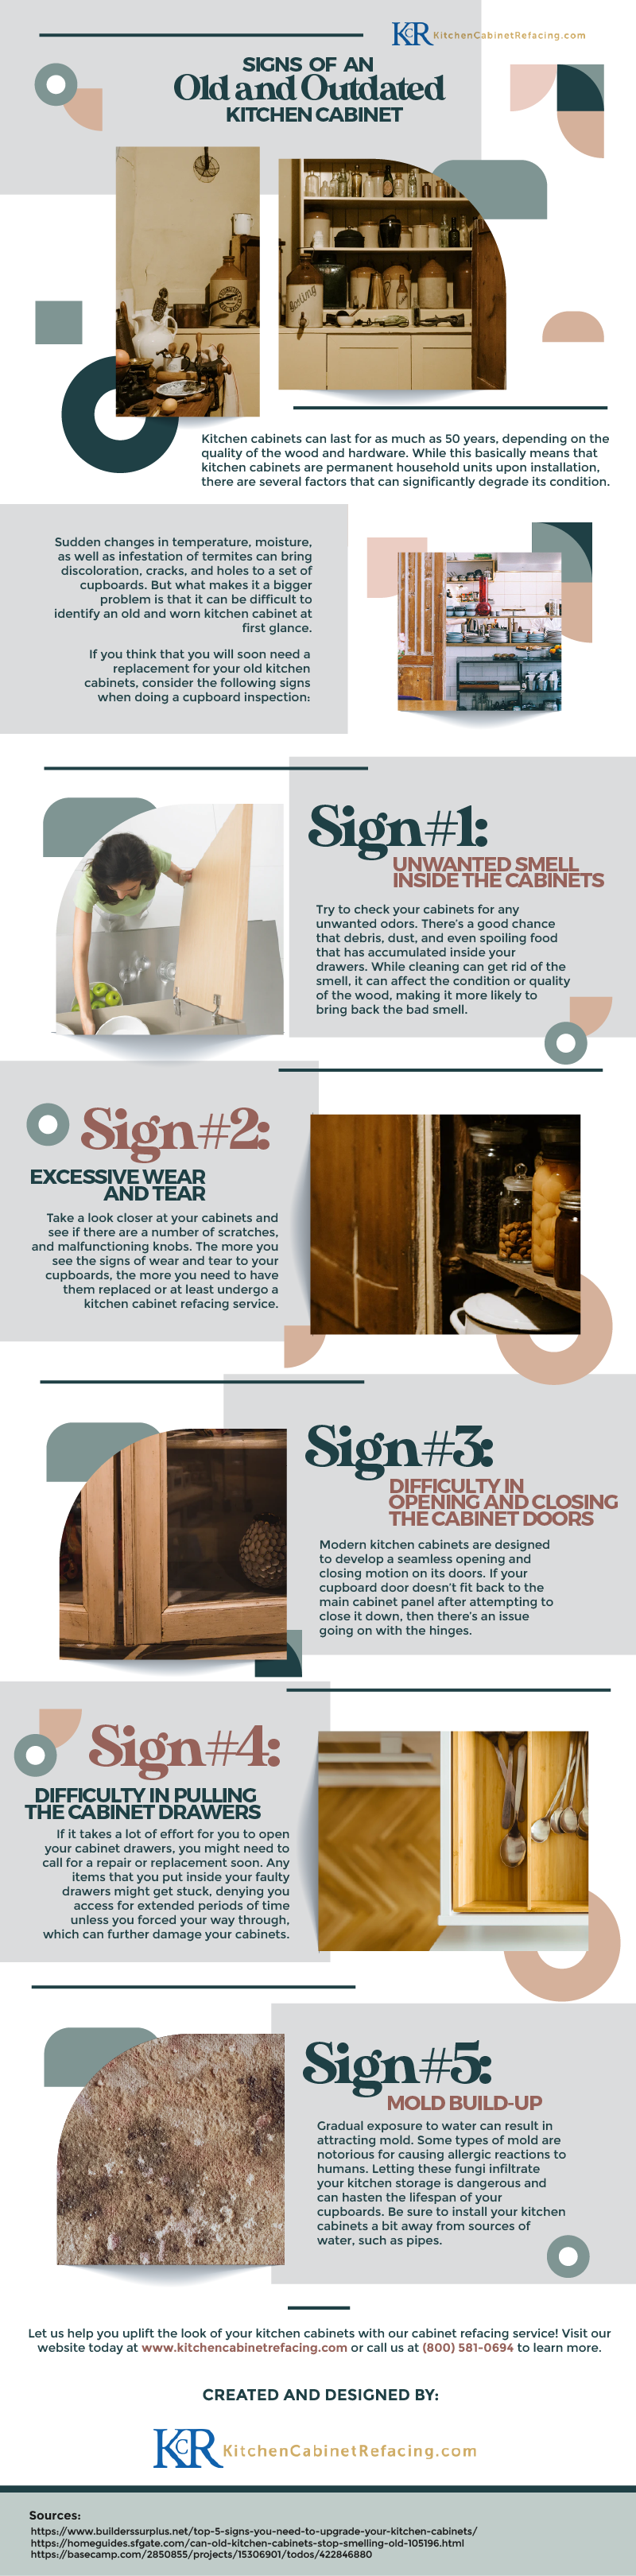 Signs-of-an-Old-and-Outdated-Kitchen-Cabinet infographic